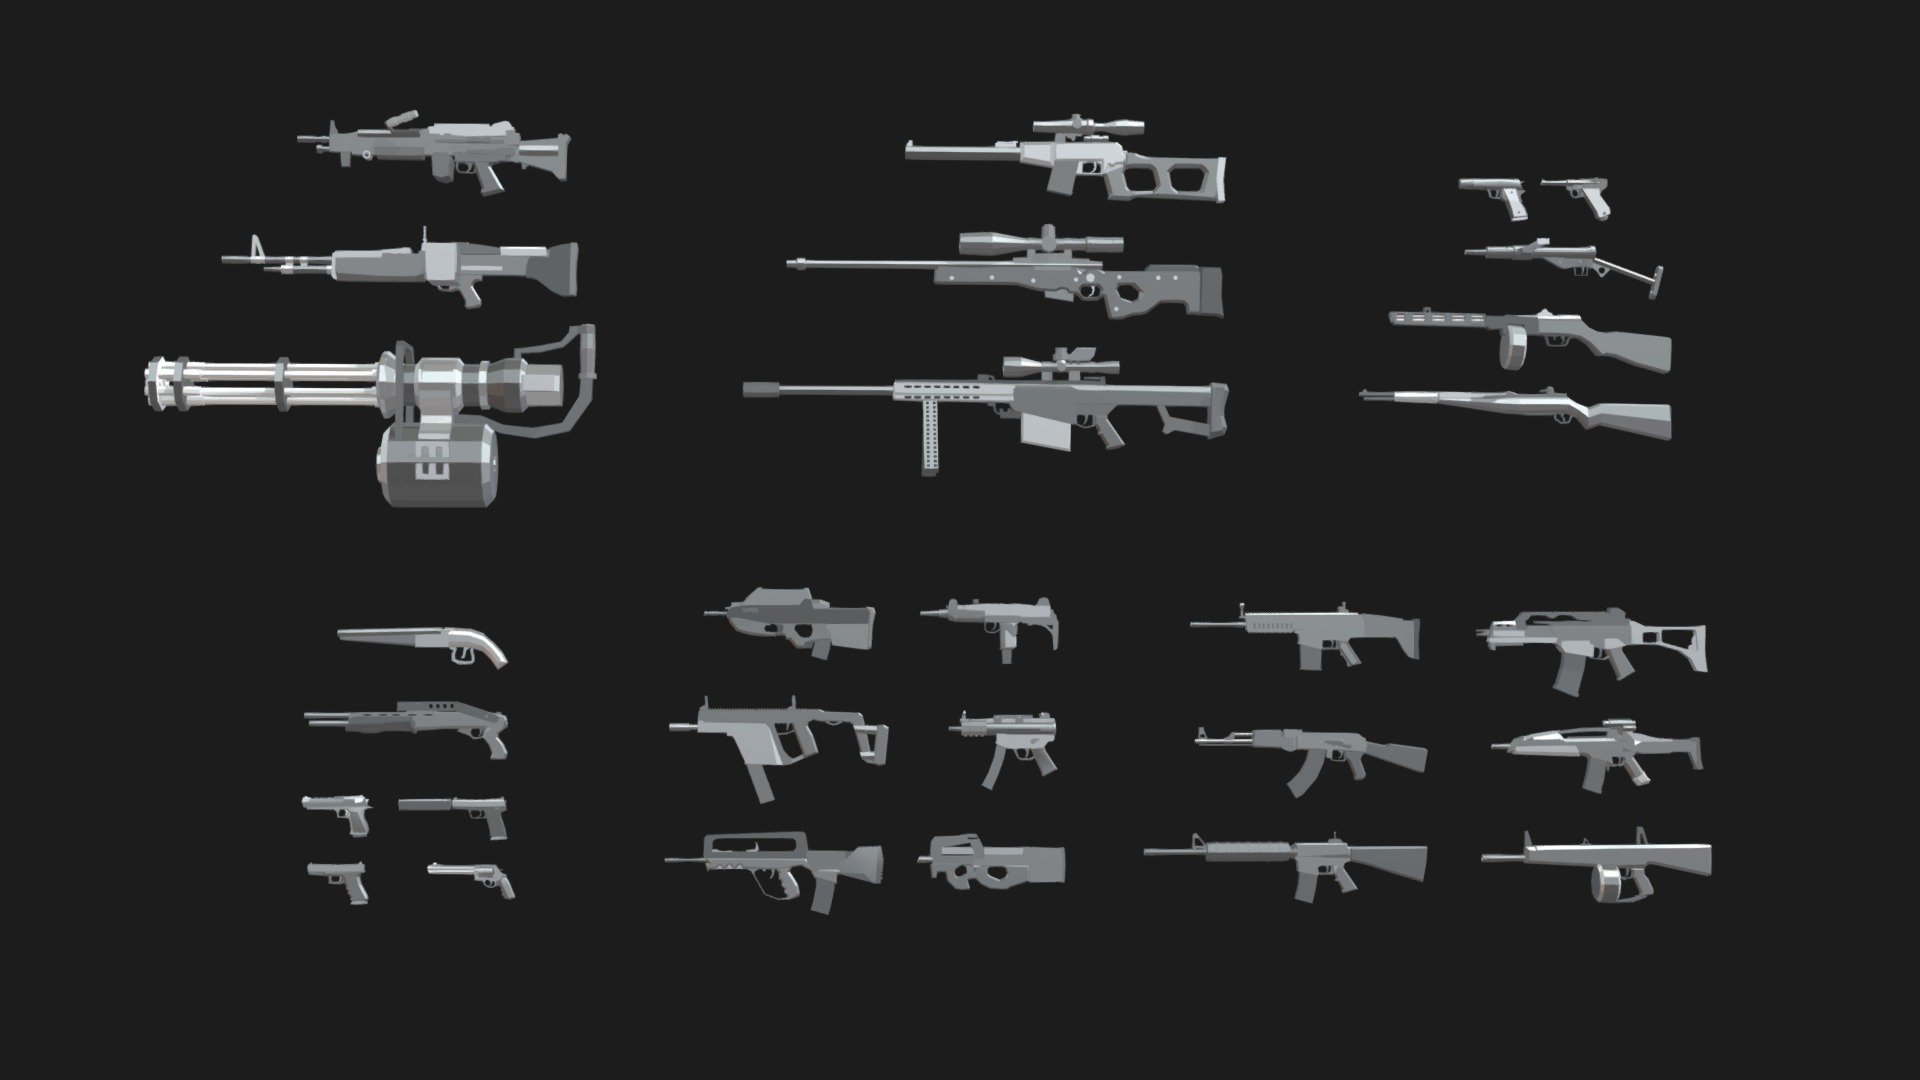 This pack include:
3 Heavy Machine Guns
- M60 (1182 Polys)
- M249 (1054 Polys)
- Minigun (1259 Polys)

3 Snipers
- VSS Sniper (1084 Polys)
- L115 Awp (1234 Polys)
- Barett (3118 Polys)

5 WW2 Weapons
- Sten (971 Polys)
- PPSH (836 Polys)
- M1 Garand (376 Polys)
- M1911 (443 Polys)
- Luger P08 (488 Polys)

2 Shotguns
- Spas12 (1268 Polys)
- Sawed-Off (319 Polys)

4 Pistols
- Glock17 (348 Polys)
- Revolver (761 Polys)
- Desert Eagle (557 Polys)
- Usp-45 (453 Polys)

6 Spec-Ops Weapons
- Uzi (927 Polys)
- P90 (672 Polys)
- Mp5K (1033 Polys)
- Kriss Vector (776 Polys)
- FN2000 (601 Polys)
- Famas (848 Polys)

Assault Rifles
- XM8 (722 Polys)
- ScarH (973 Polys)
- M16A4 (930 Polys)
- G36 (823 Polys)
- AK47 (764 Polys)
- AA12 (641 Polys)

All models are UV Unwrapped

No PBR
No Texture

You can access this package from:

https://bit.ly/3vZl28N

https://www.artstation.com/a/14289532 - Low-Poly Weapon Asset Pack - 3D model by r2detta 3d model